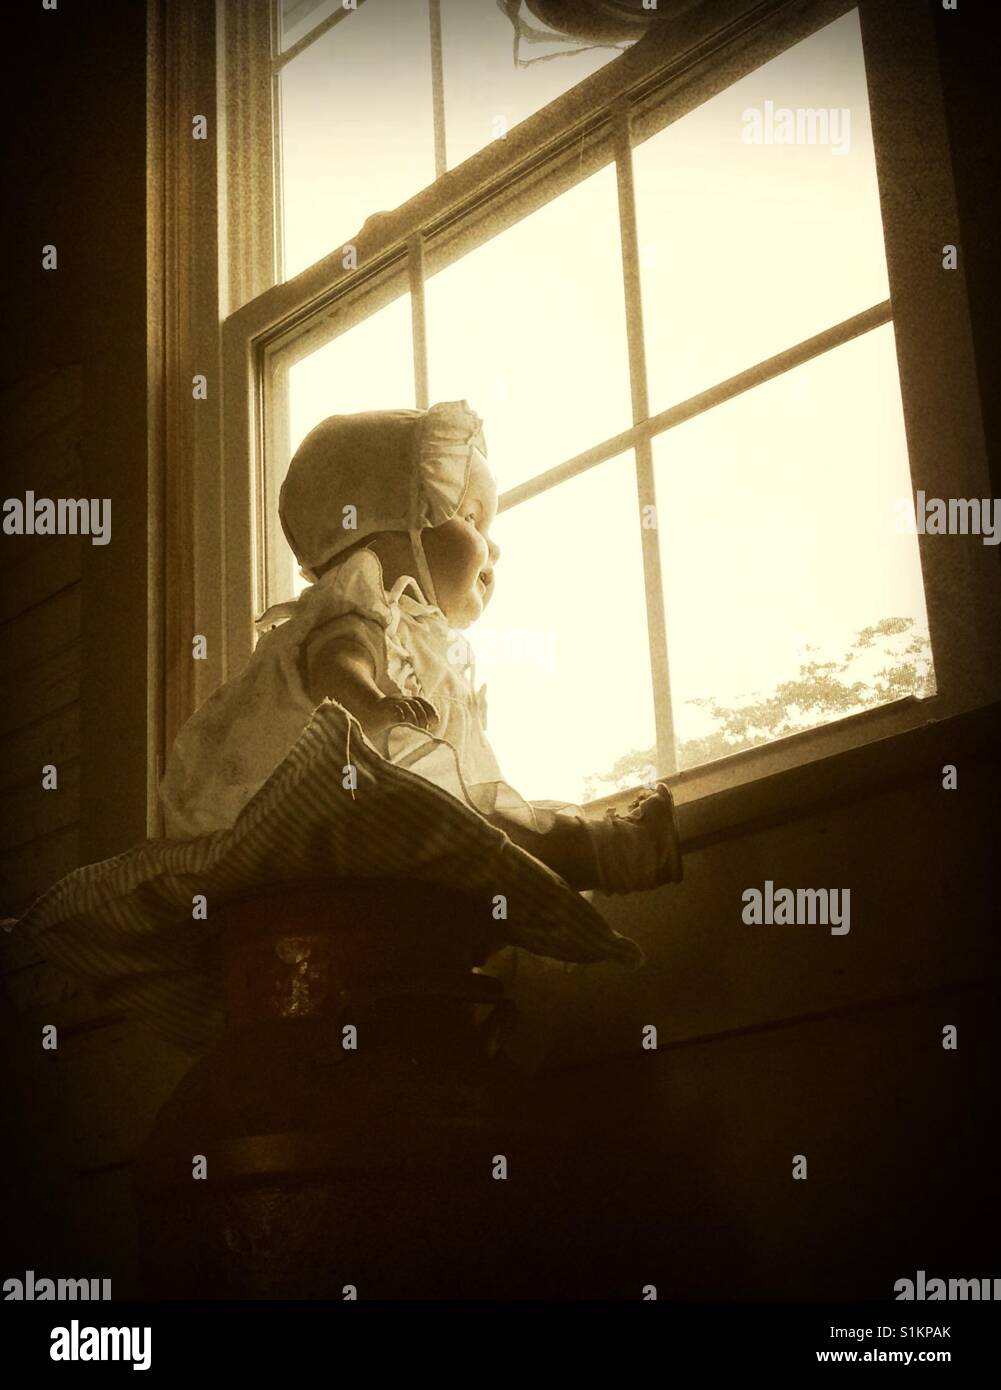 The wait- Doris the composition doll scans out window of old house dressed in bonnet, dress, socks and shoes Stock Photo